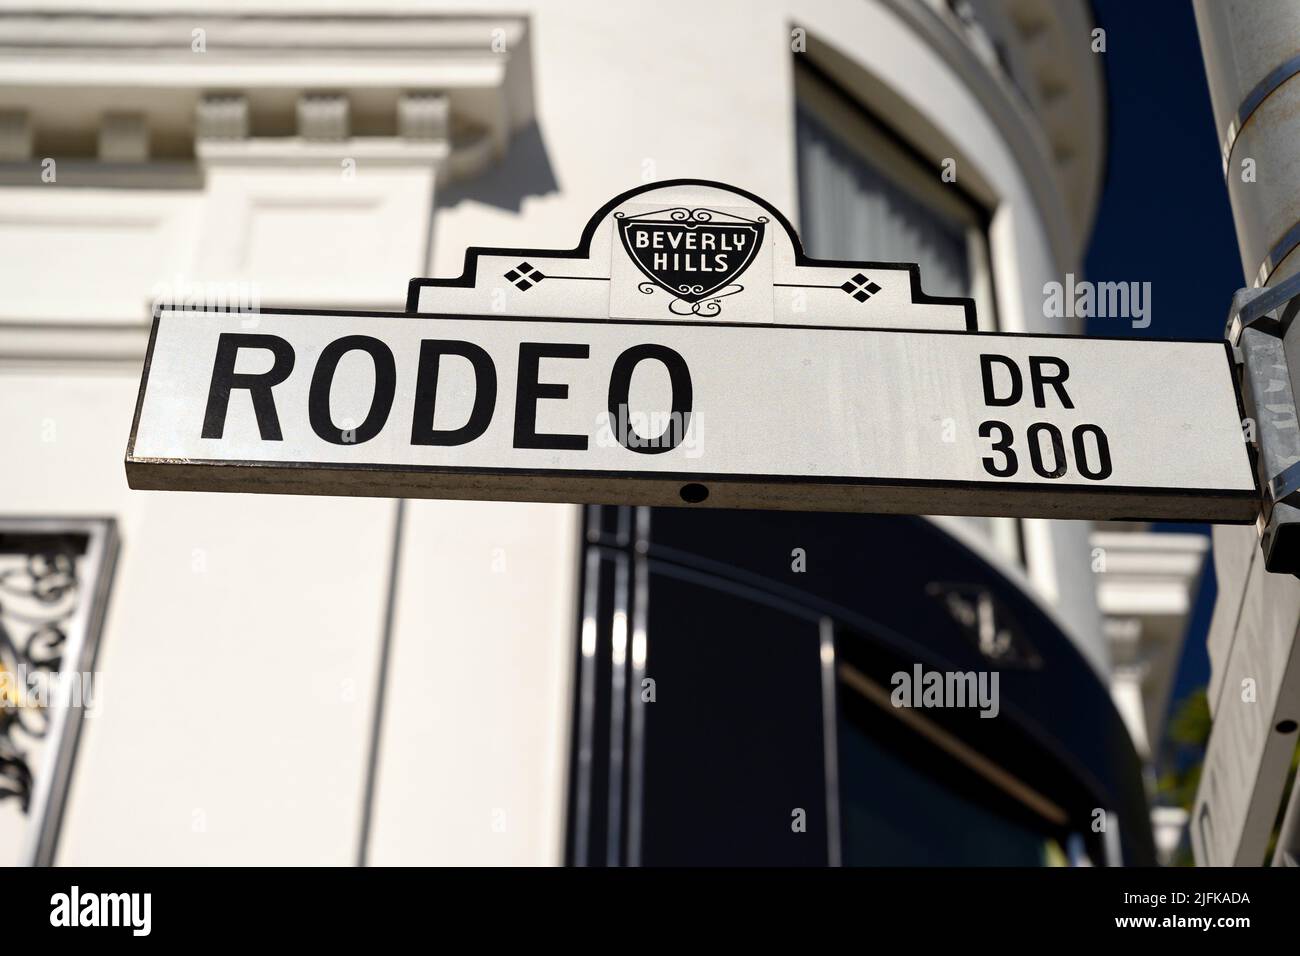 Rodeo Drive Cross Street Signs Stock Photo, Picture and Royalty Free Image.  Image 56530324.